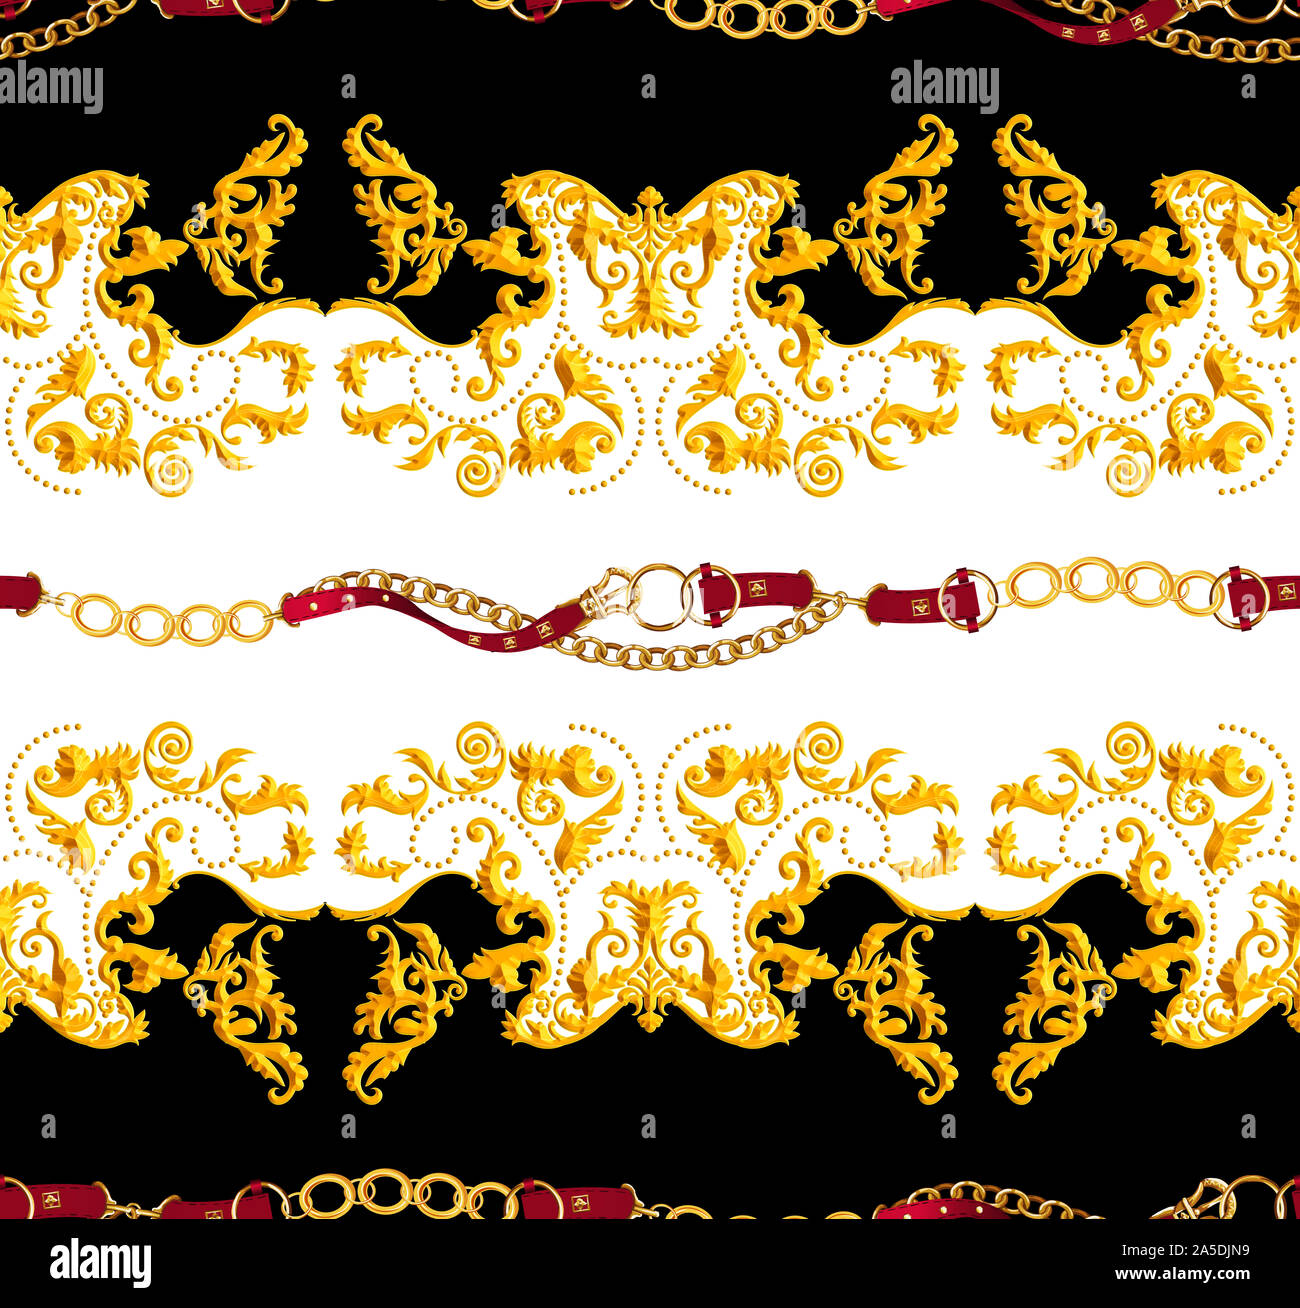 Seamless Golden Chains and Belts Pattern. Repeat Antique Decorative Baroque for Decor, Fabric, Prints, Textile. with Black and White background. Ready Stock Photo